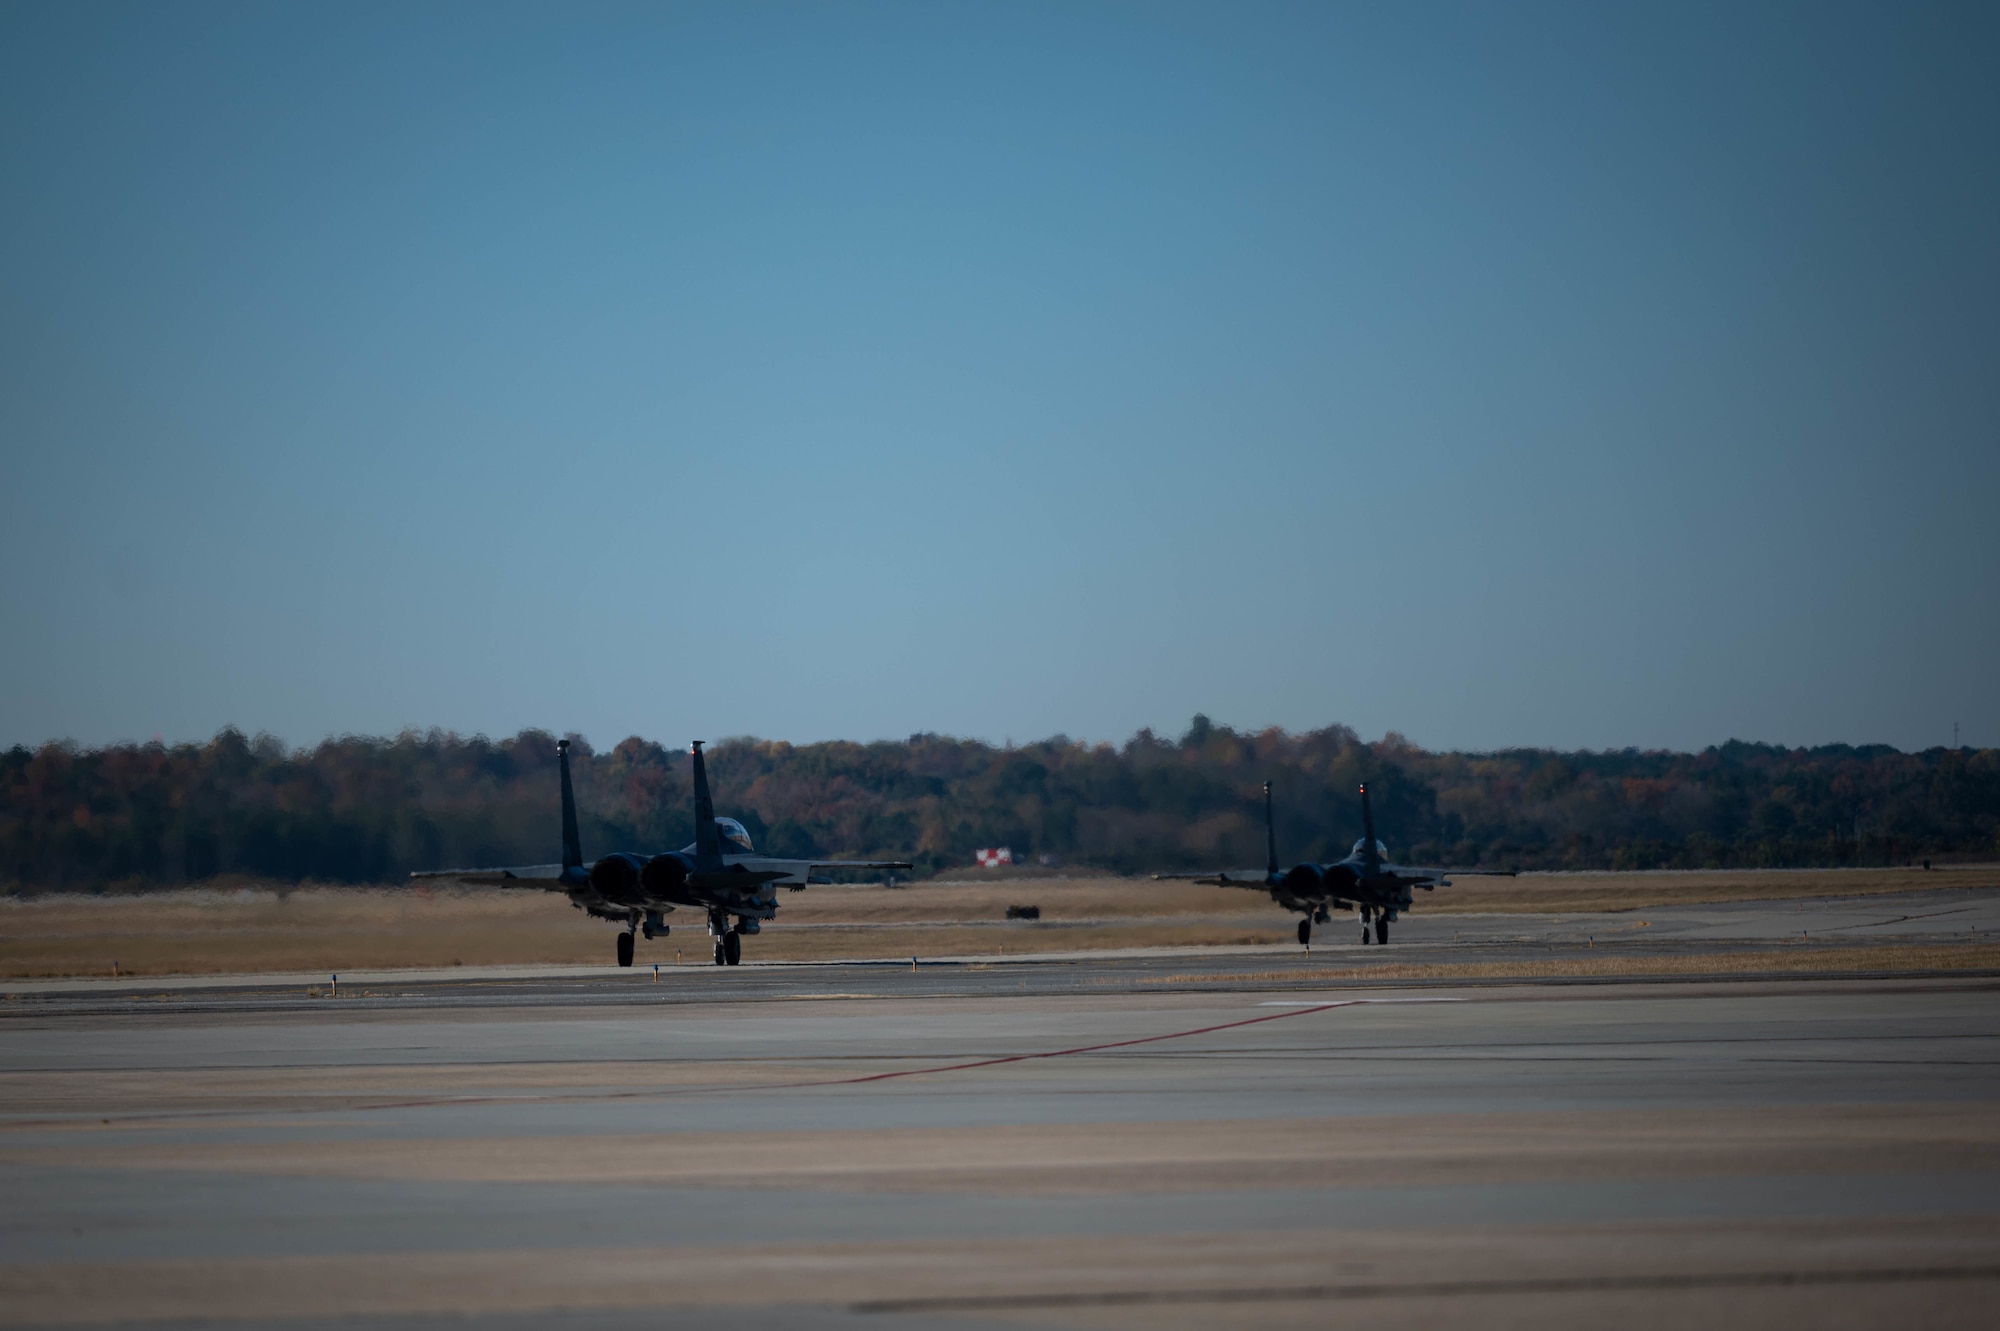 Two F-15E Strike Eagles from the 335th Fighter Generation Squadron taxi to the runway as a part of Razor Talon at Seymour Johnson Air Force Base, North Carolina, Nov. 16, 2021. Razor Talon is a 4th Fighter Wing-led joint exercise. (U.S. Air Force photo by Senior Airman David Lynn)